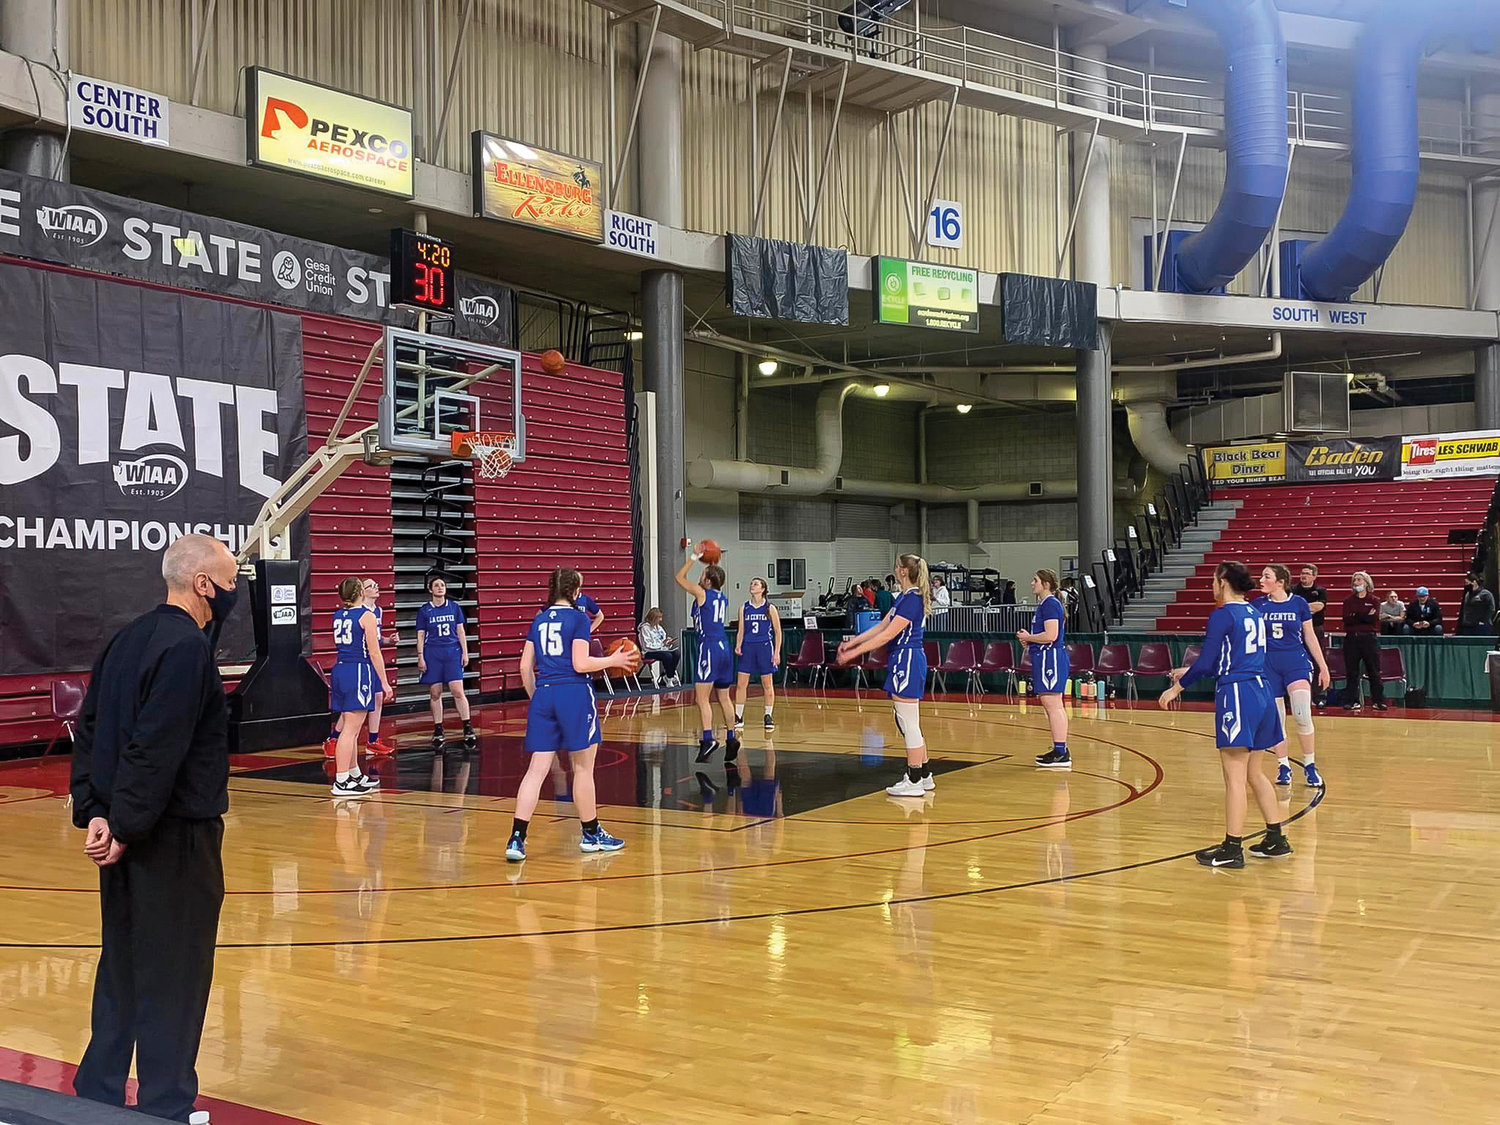 The La Center Wildcat girls basketball team warms up at the Yakima Sundome on March 2 ahead of their game against Colville in the WIAA 2A state tournament.